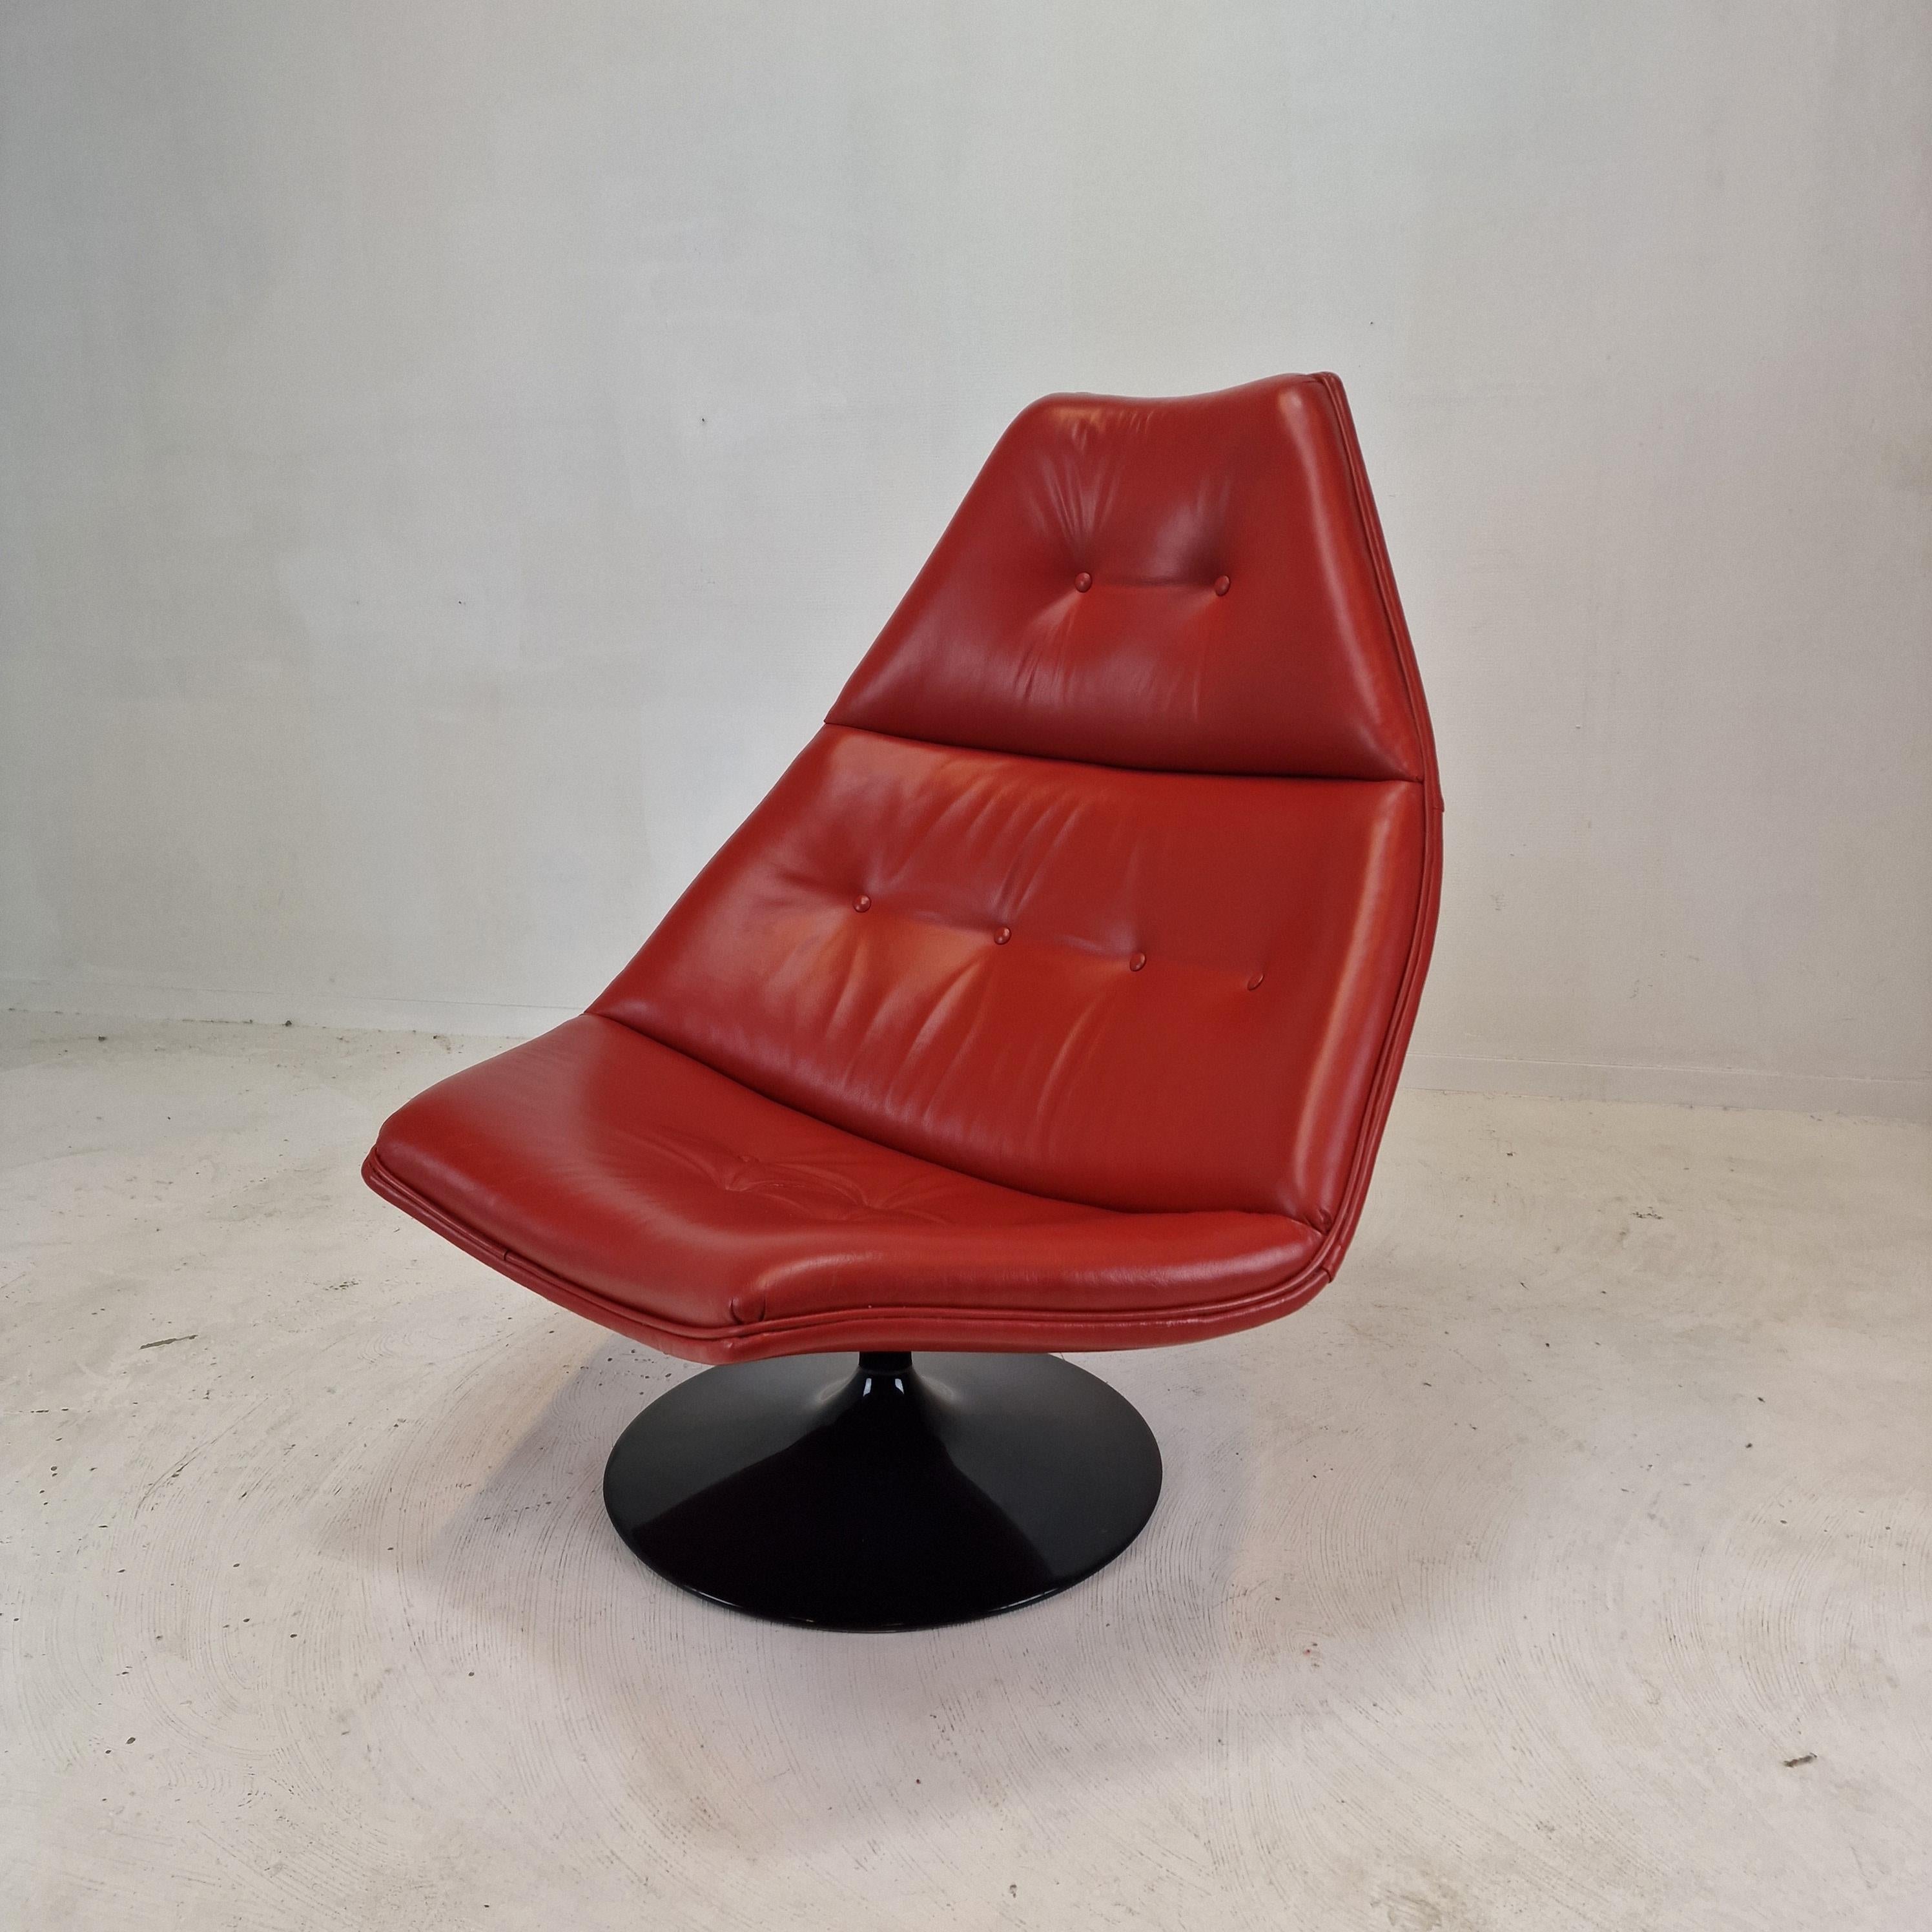 Very comfortable Artifort F510 lounge chair. 
Designed by the famous English designer Geoffrey Harcourt in the 70's. 

Very solid wooden frame with a large pivoting metal foot.

The chair has high quality leather, color red.
The leather is in good